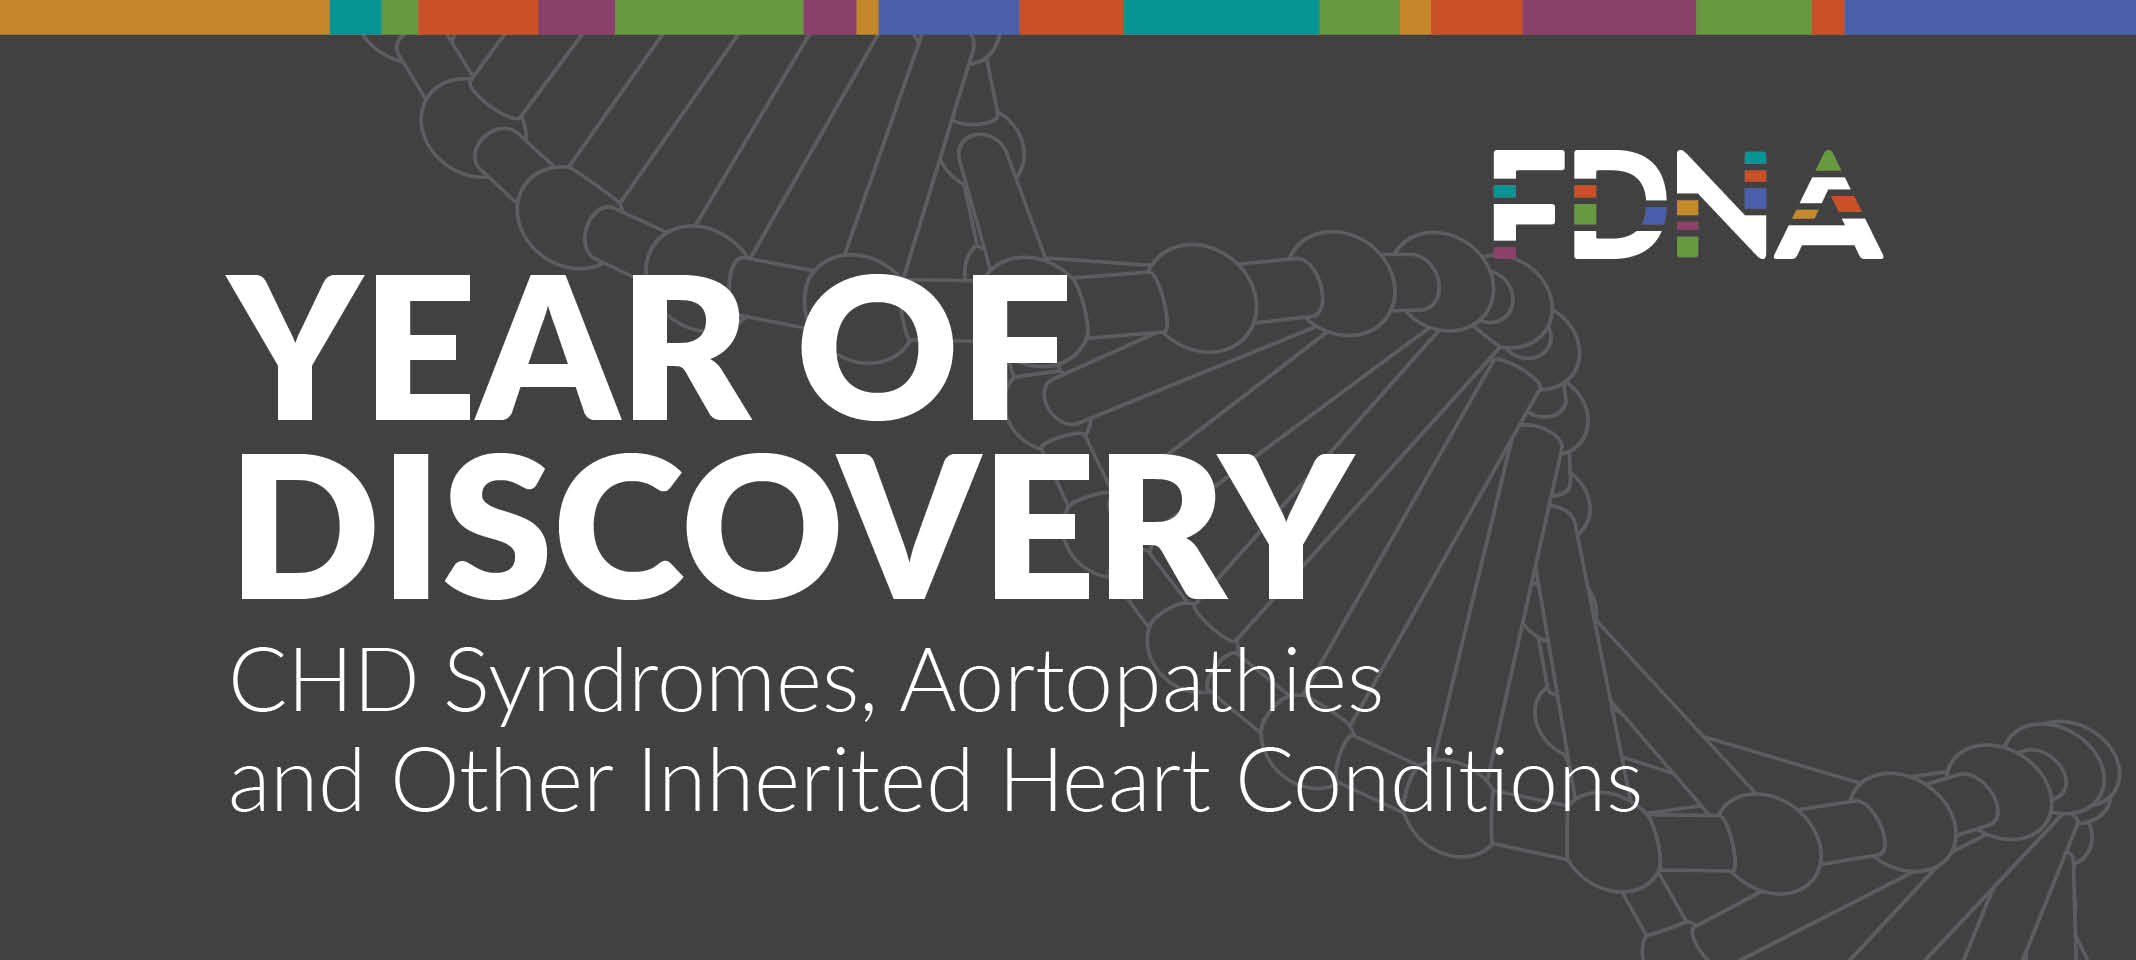 Congenital Heart Defect Syndromes, Aortopathies, and Other Inherited Heart Conditions